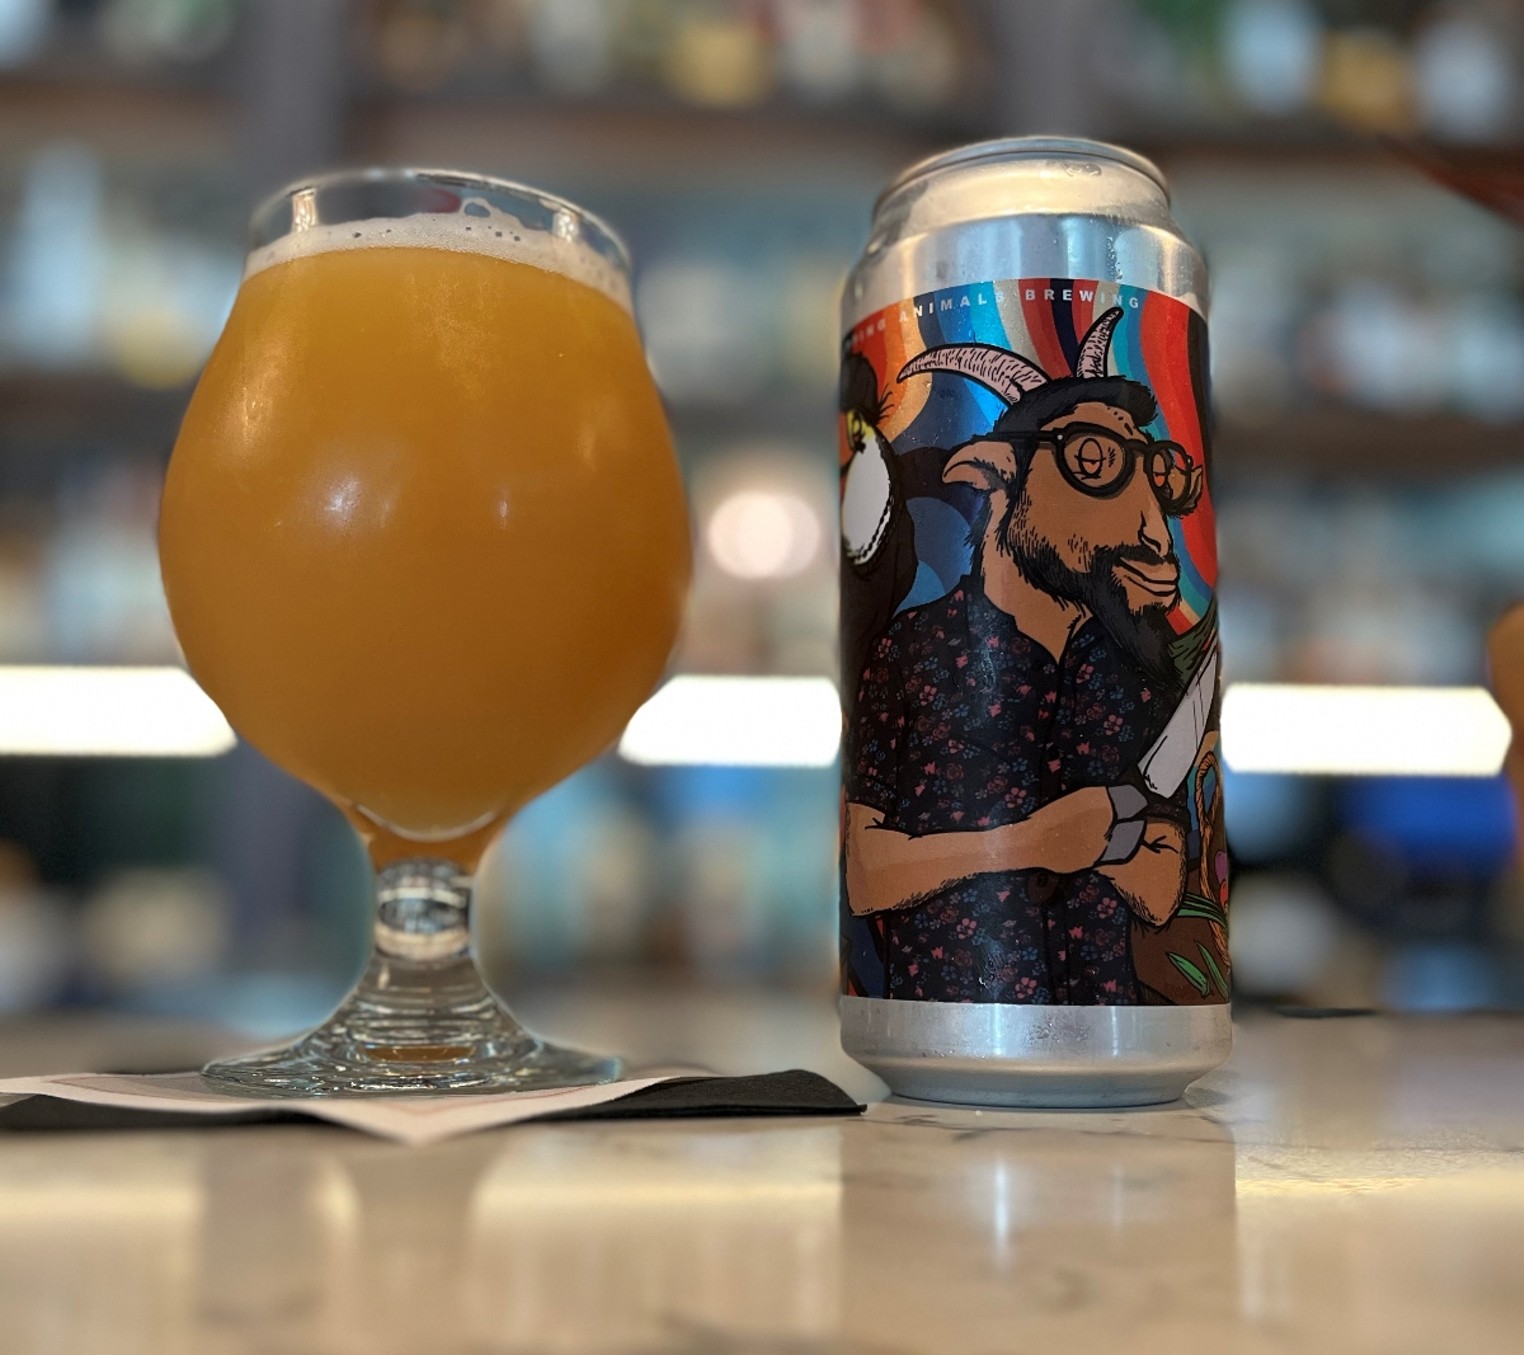 Giraffe Party - Tripping Animals Brewing Co.